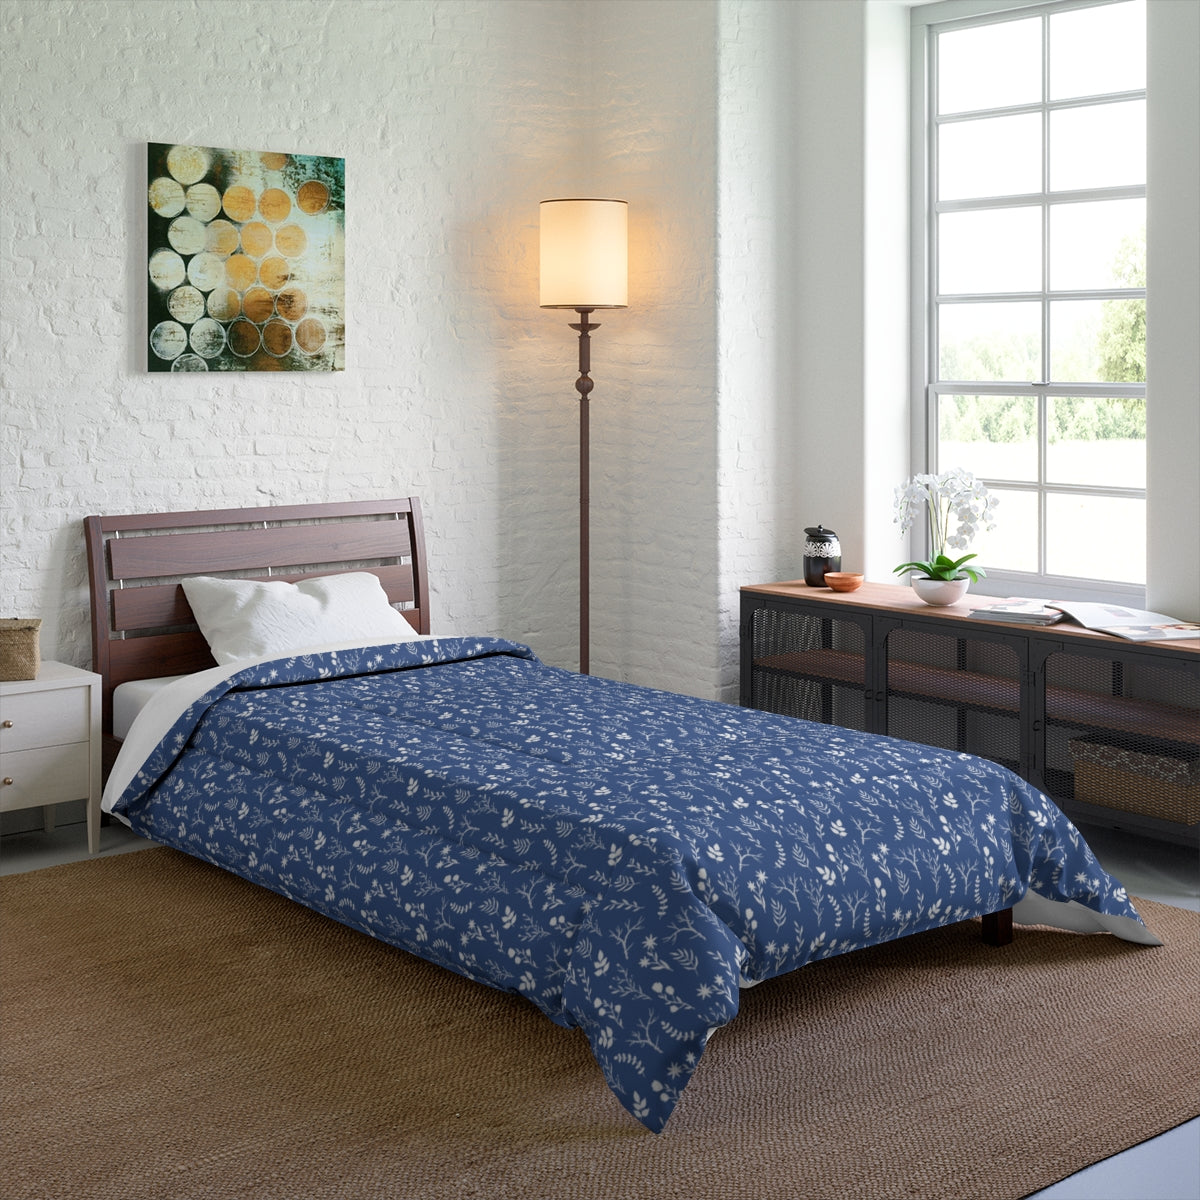 Modern floral print comforter, designed exclusively by Home Stitchery Decor. Part of a mix and match collection of modern farmhouse home decor. 10 color options to choose from. Redecorate the easy way with casual farmhouse elegant designs.